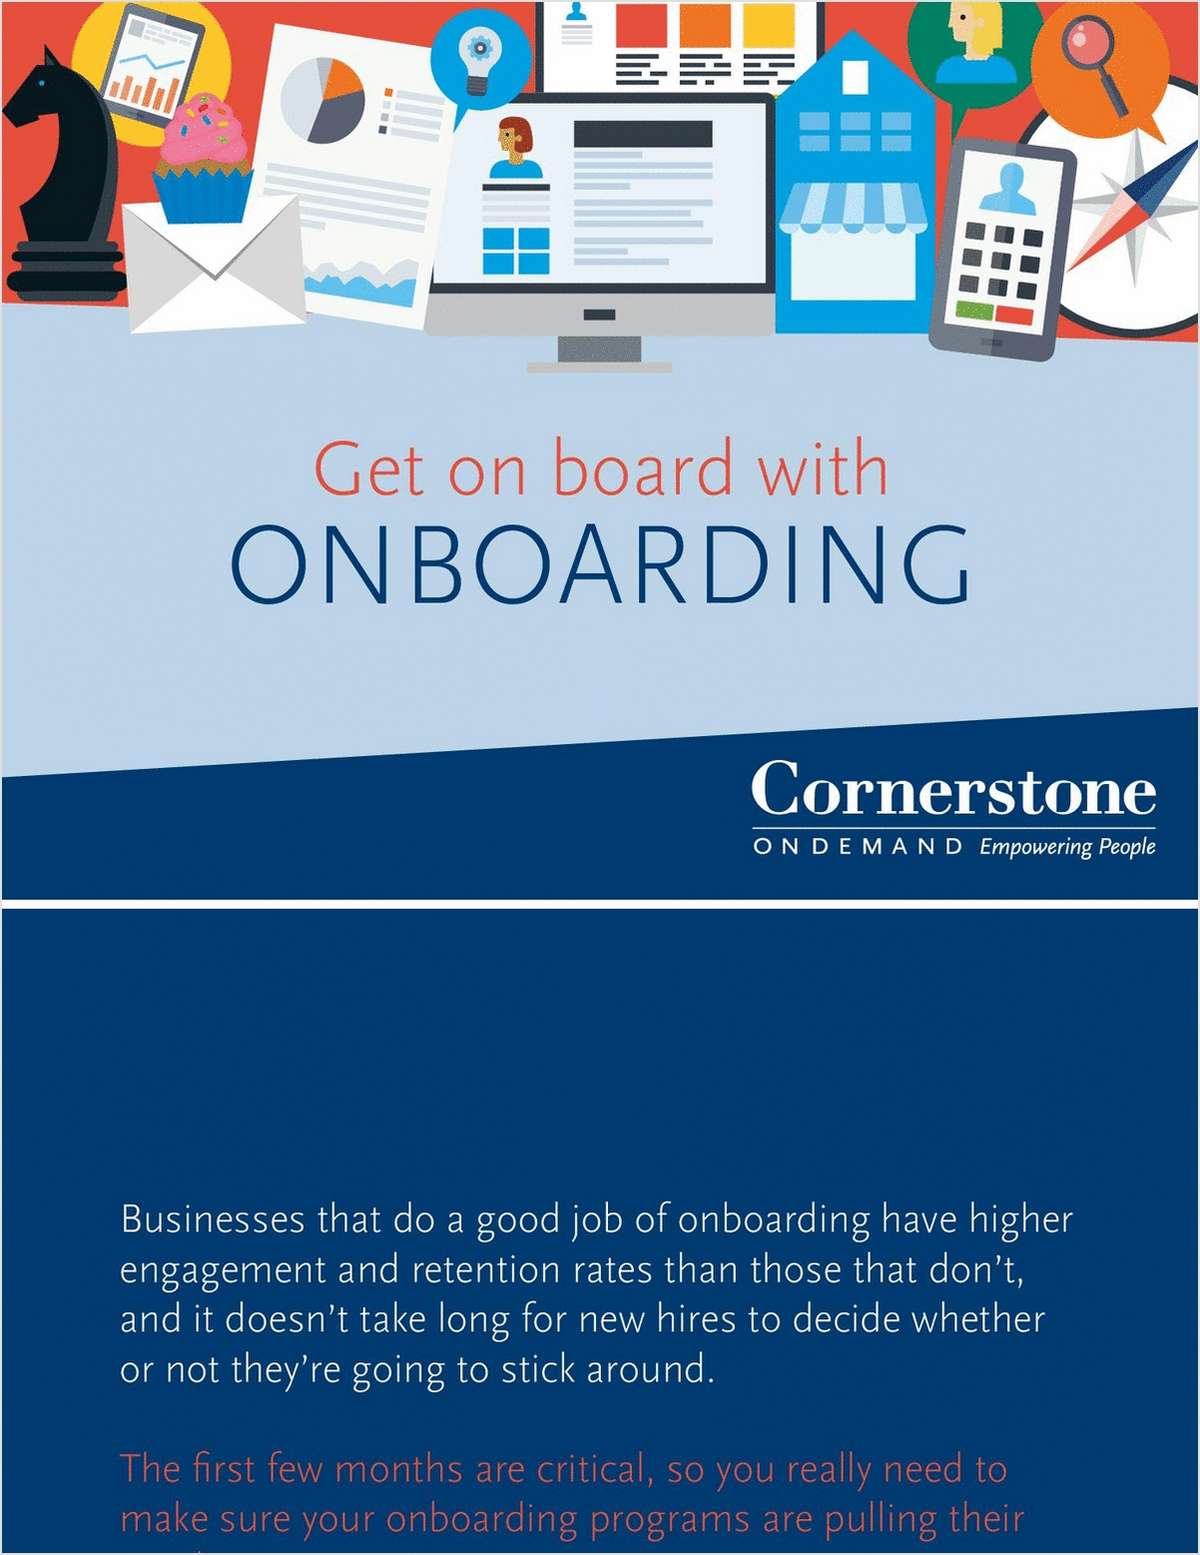 Getting Onboard with Onboarding